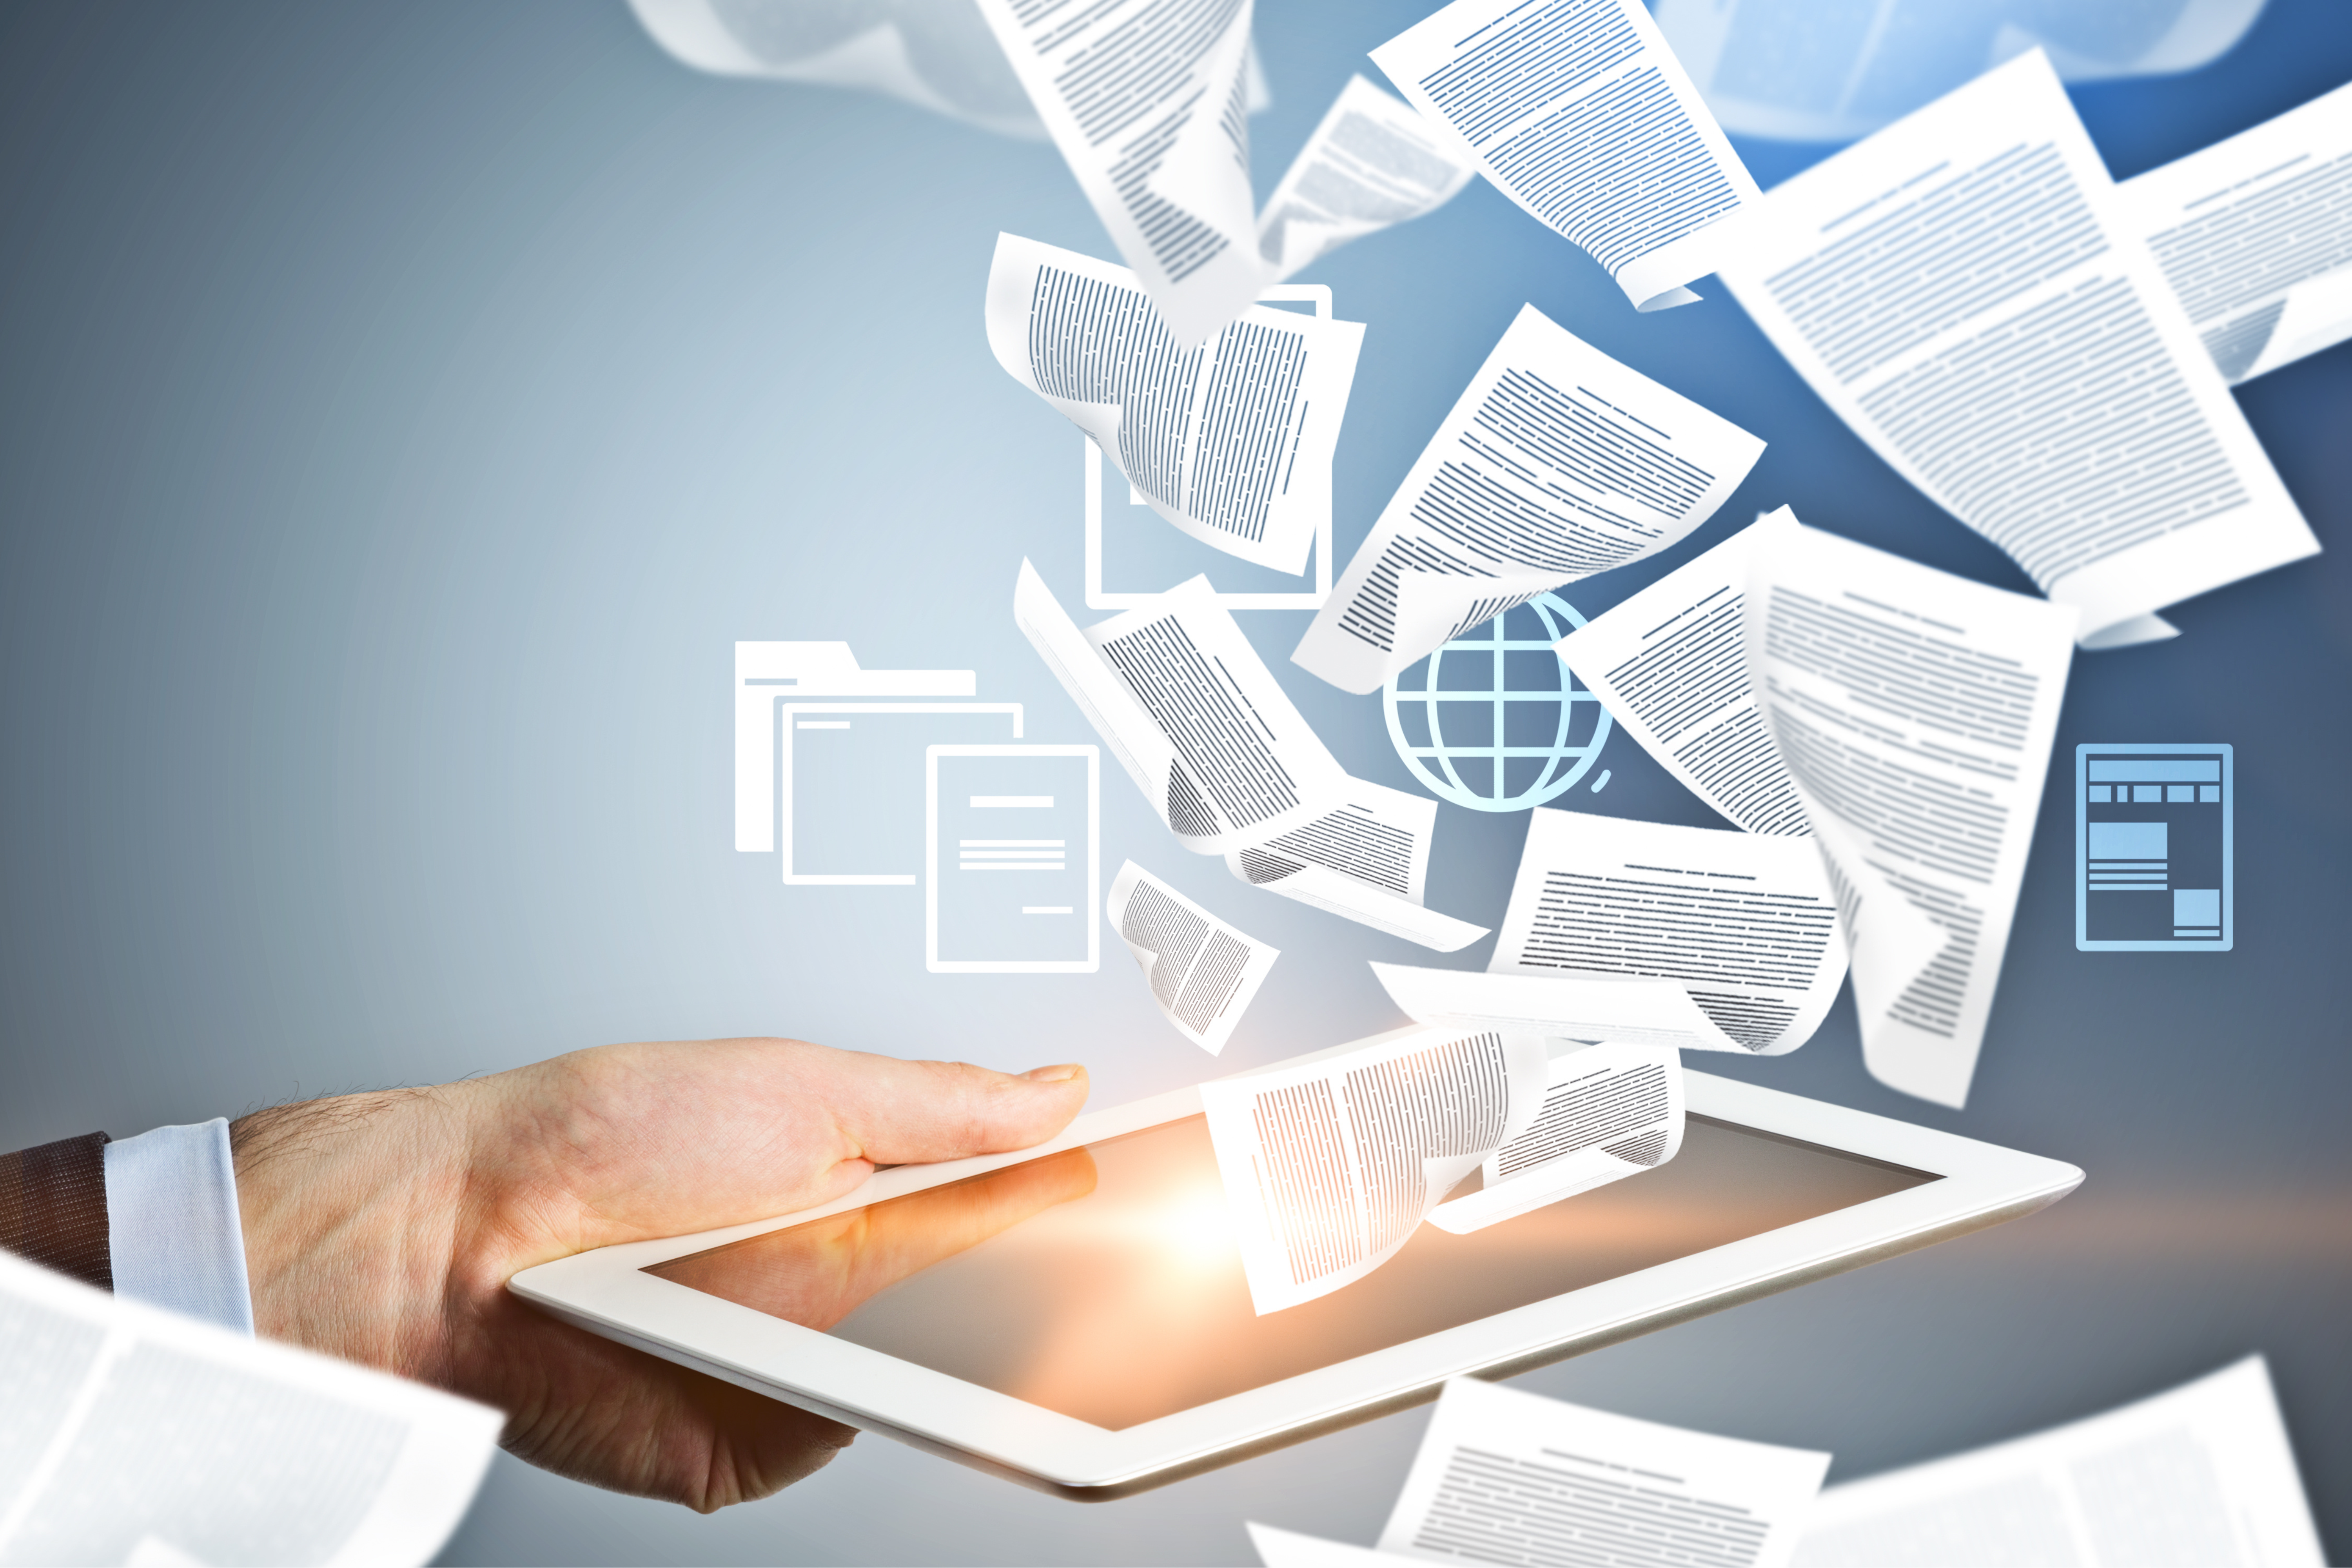 Document Management: The Best Practices for Managing Document Lifecycle